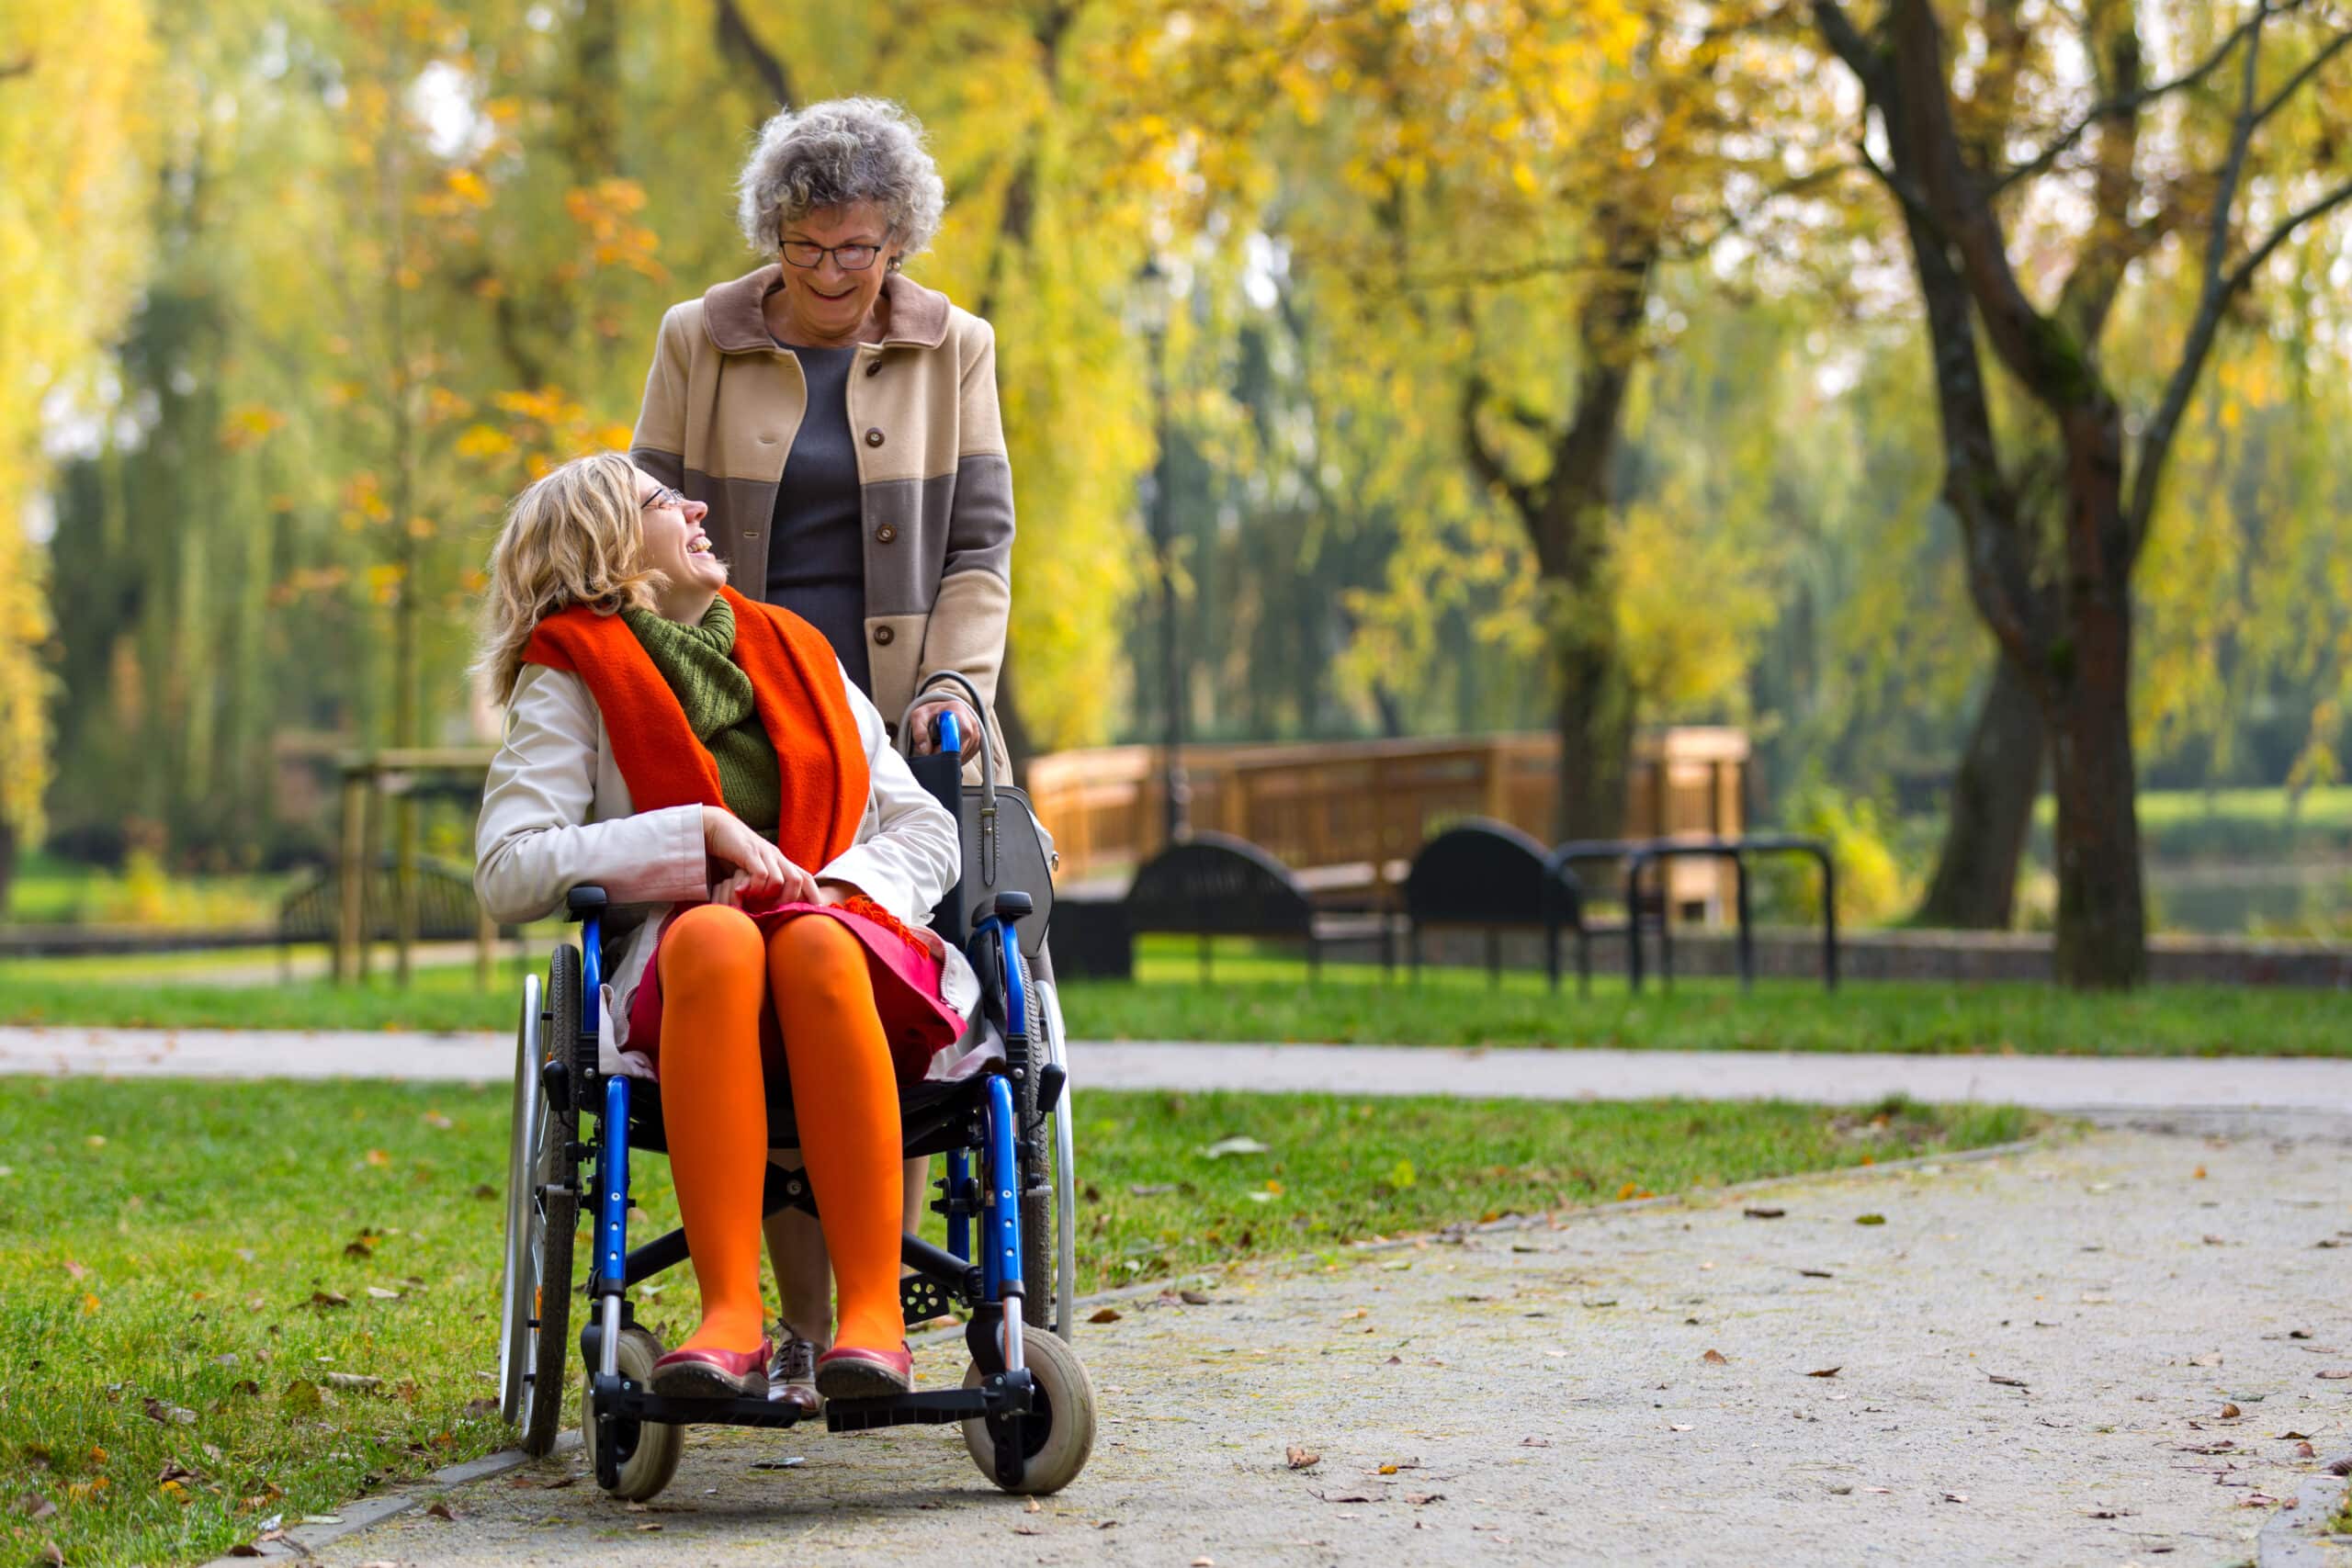 Mother pushing daughter in wheelchair in the park, smiling at one another